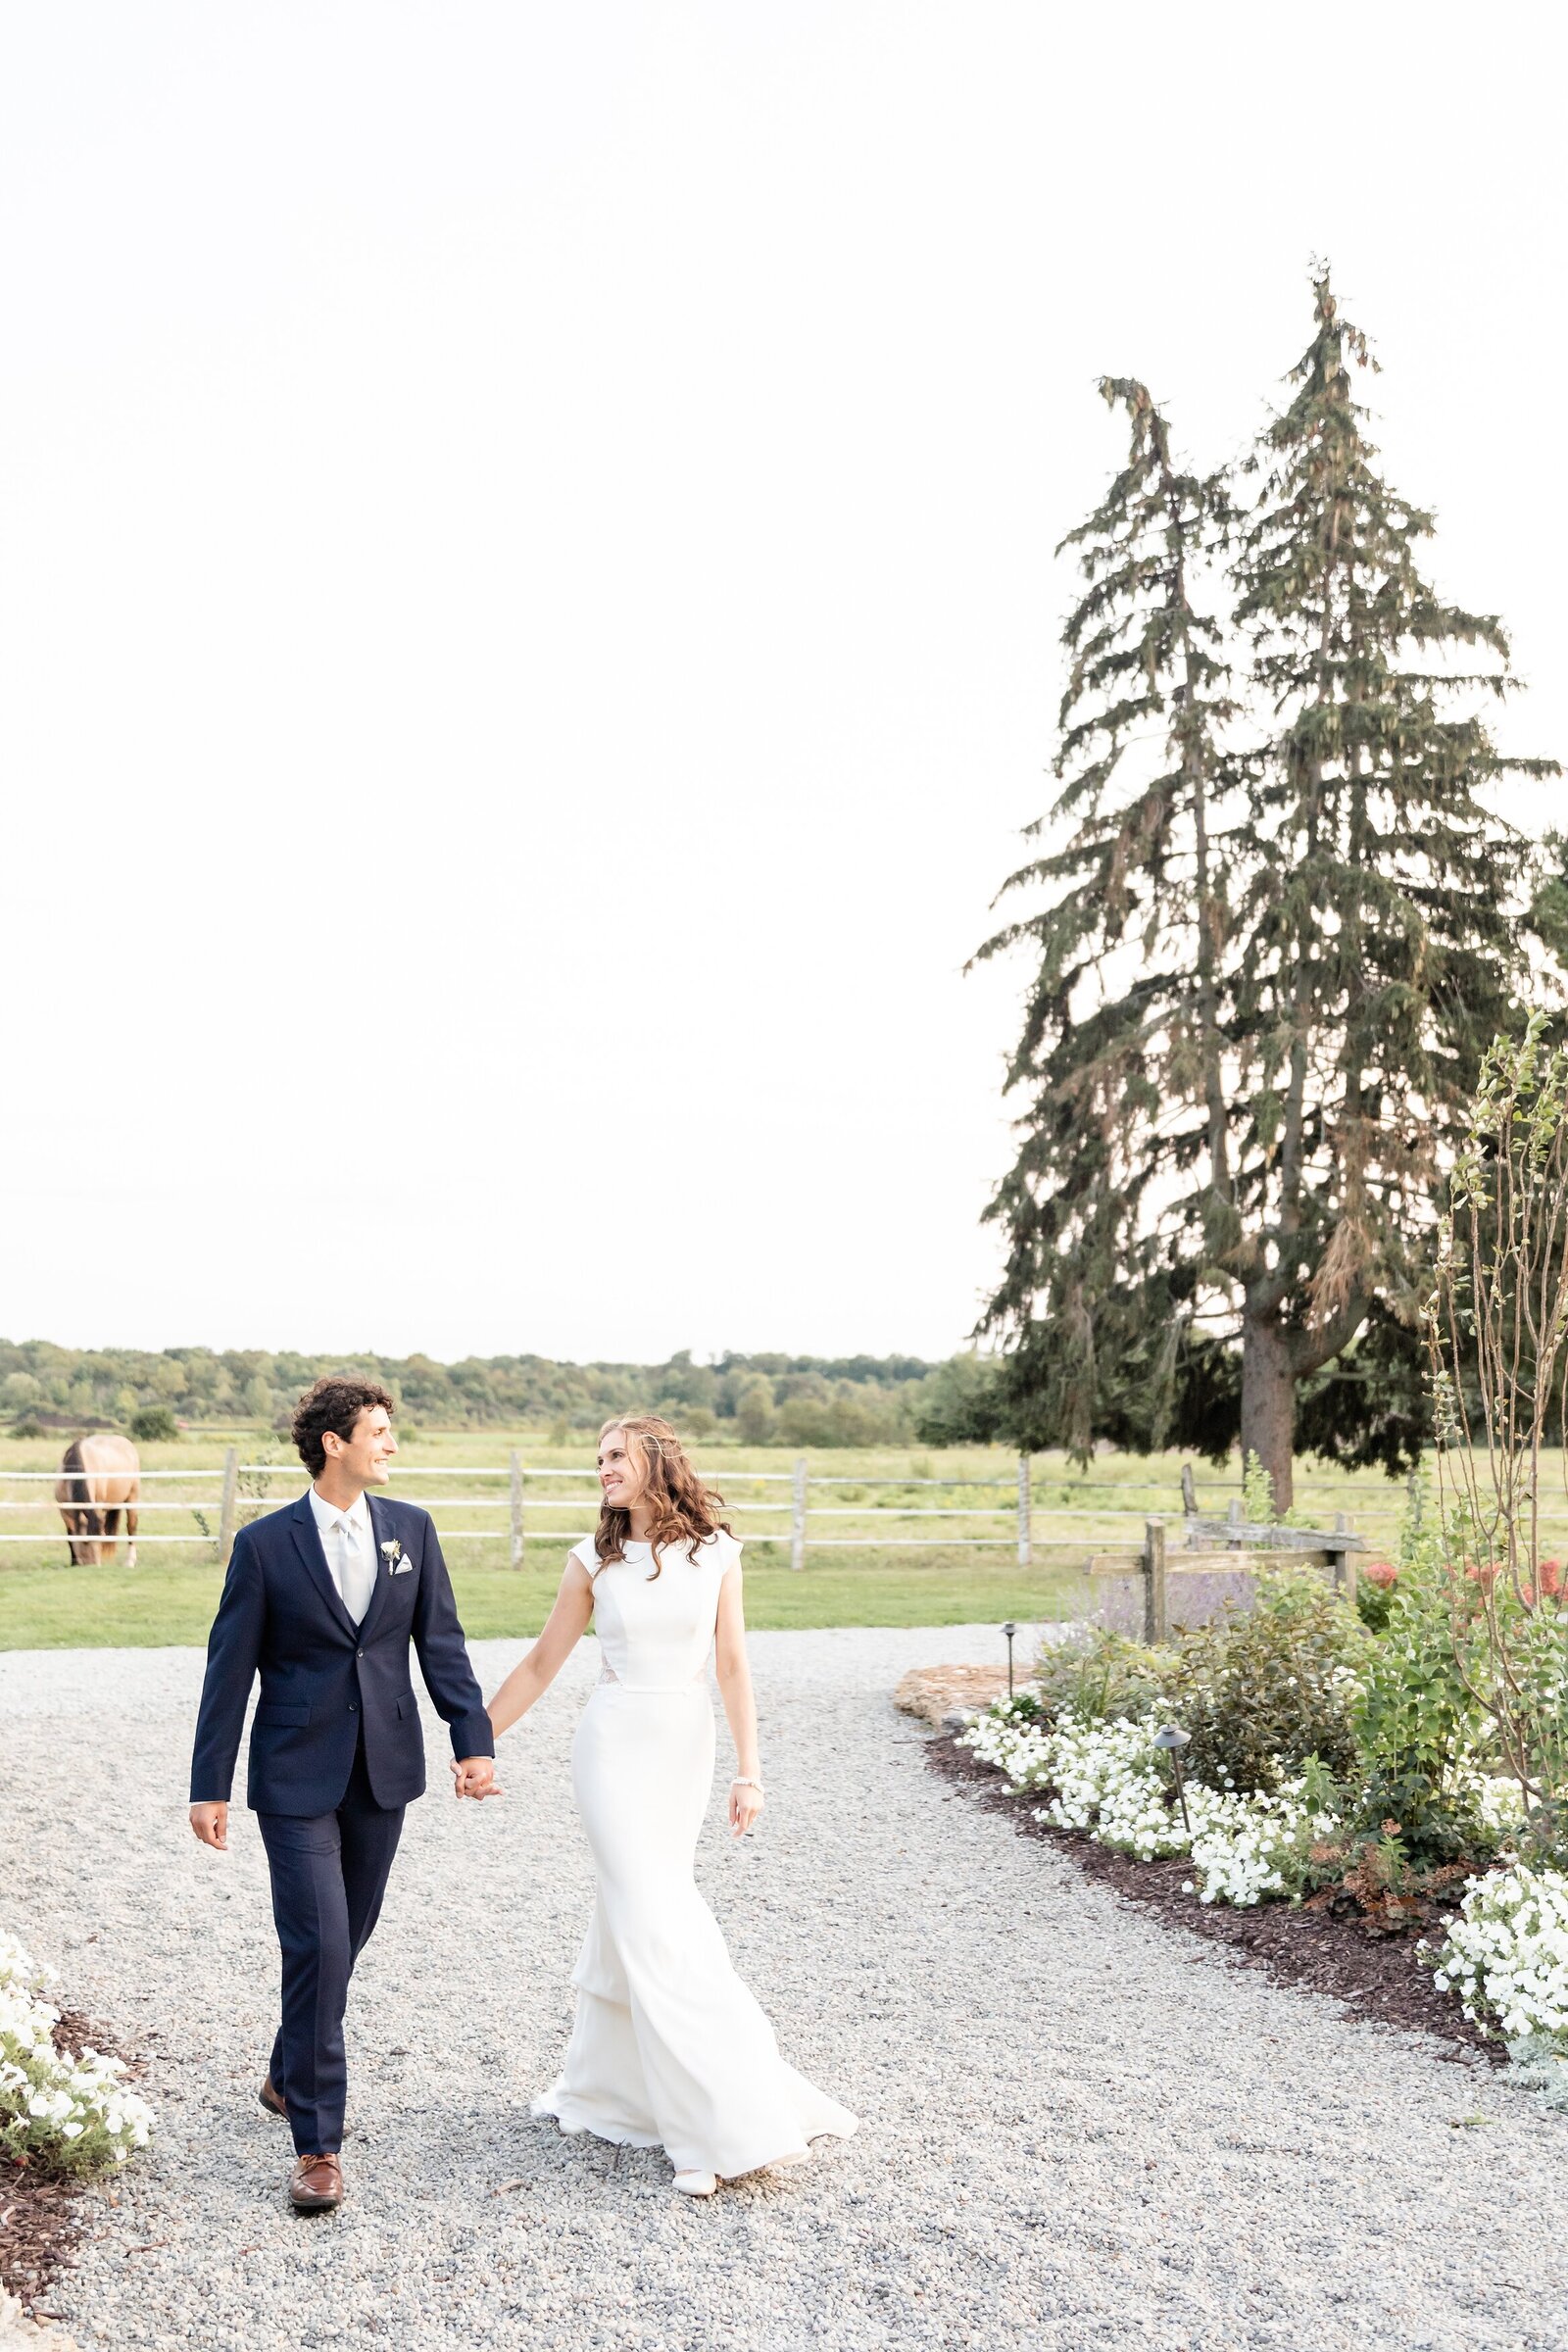 Newlyweds-walk-along-stone-pathway-during-sunset-at-a-maple-meadows-wedding